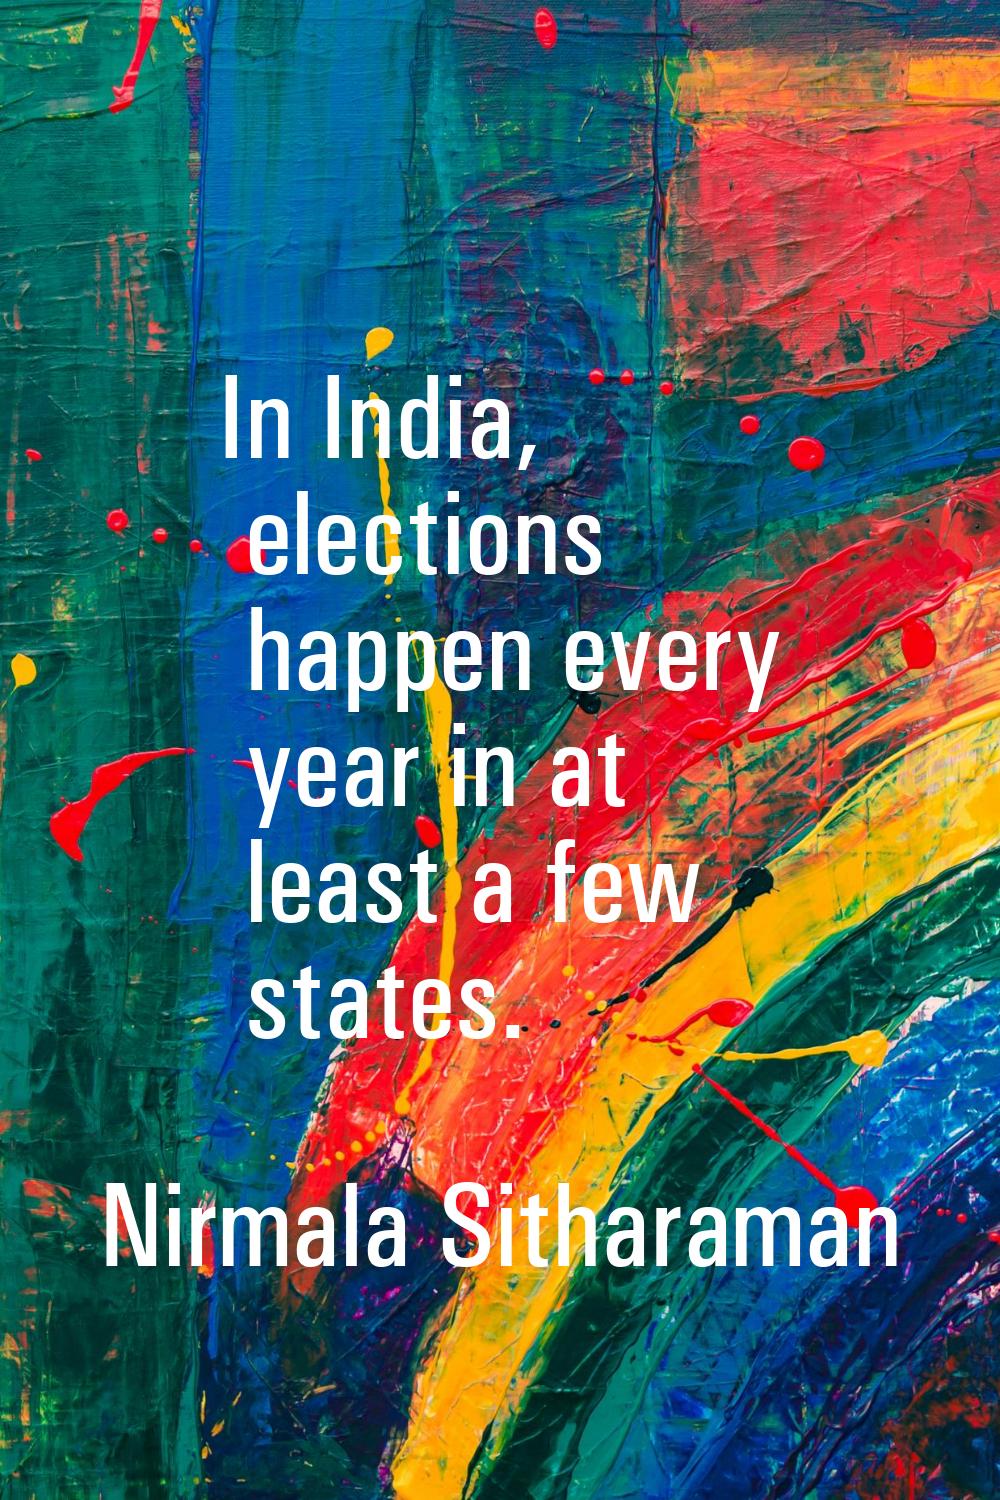 In India, elections happen every year in at least a few states.